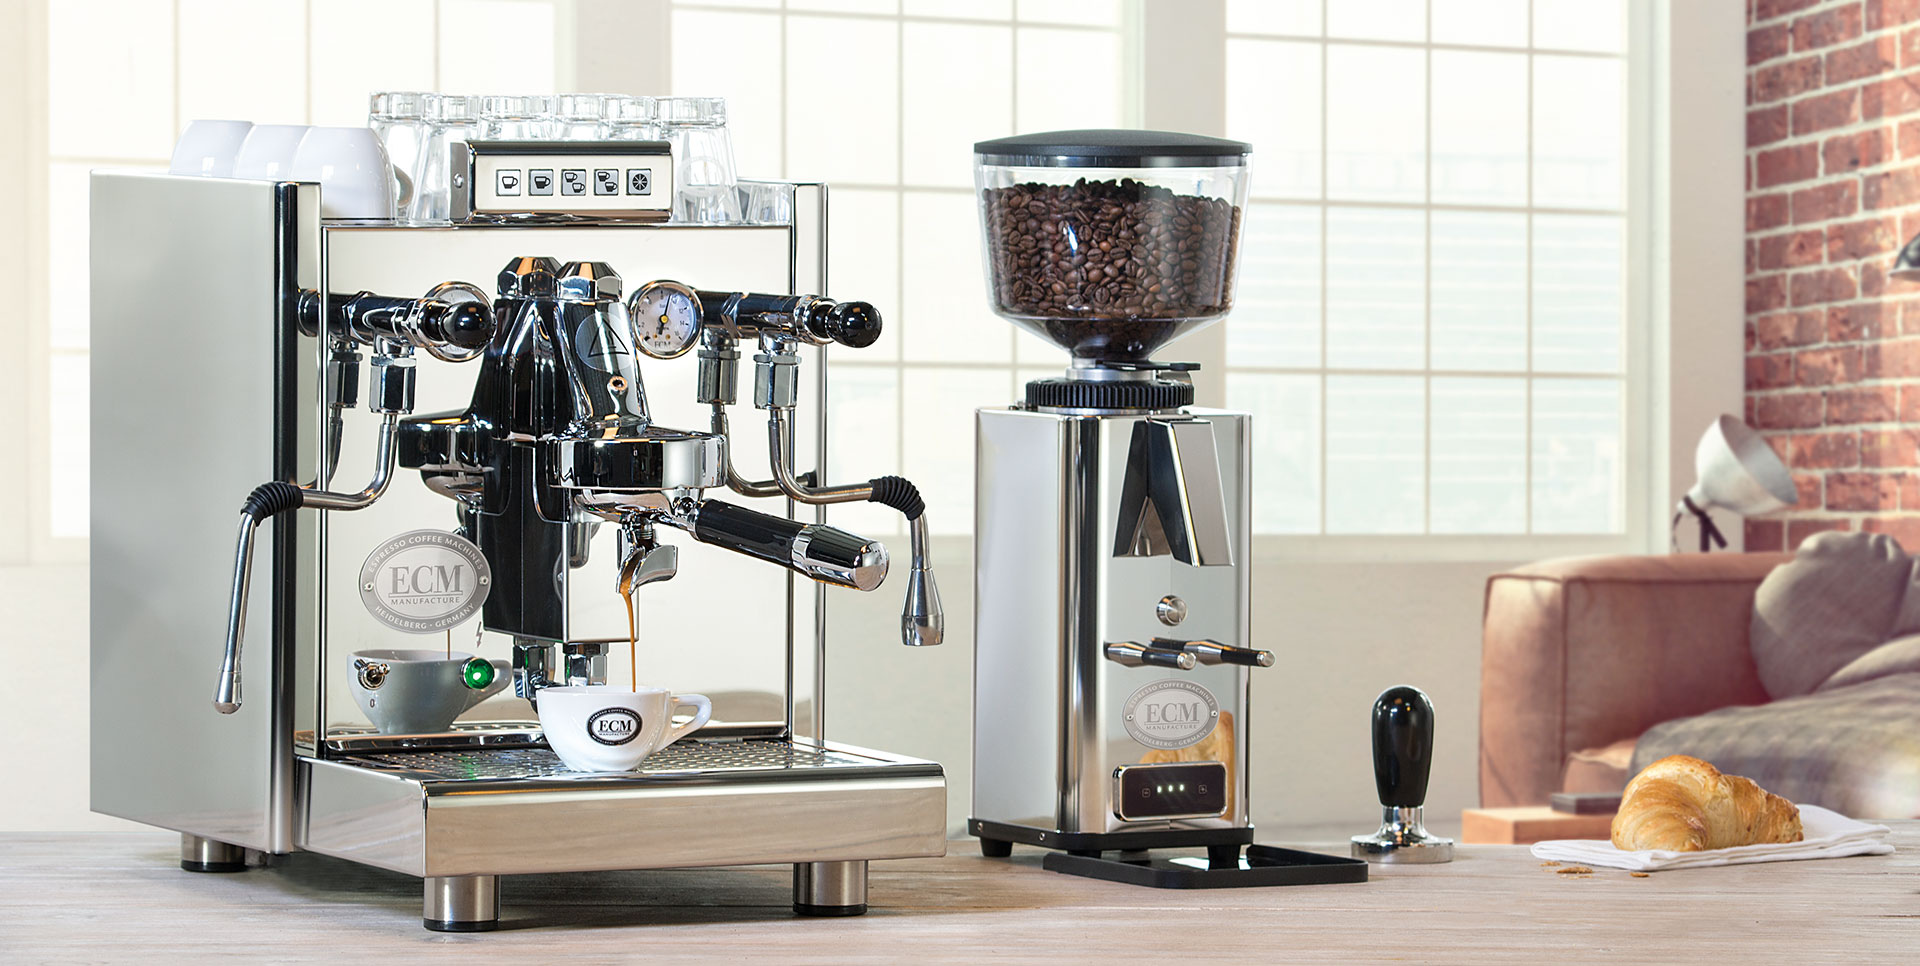 Looking for a coffee machine in Prague? Give us a call!